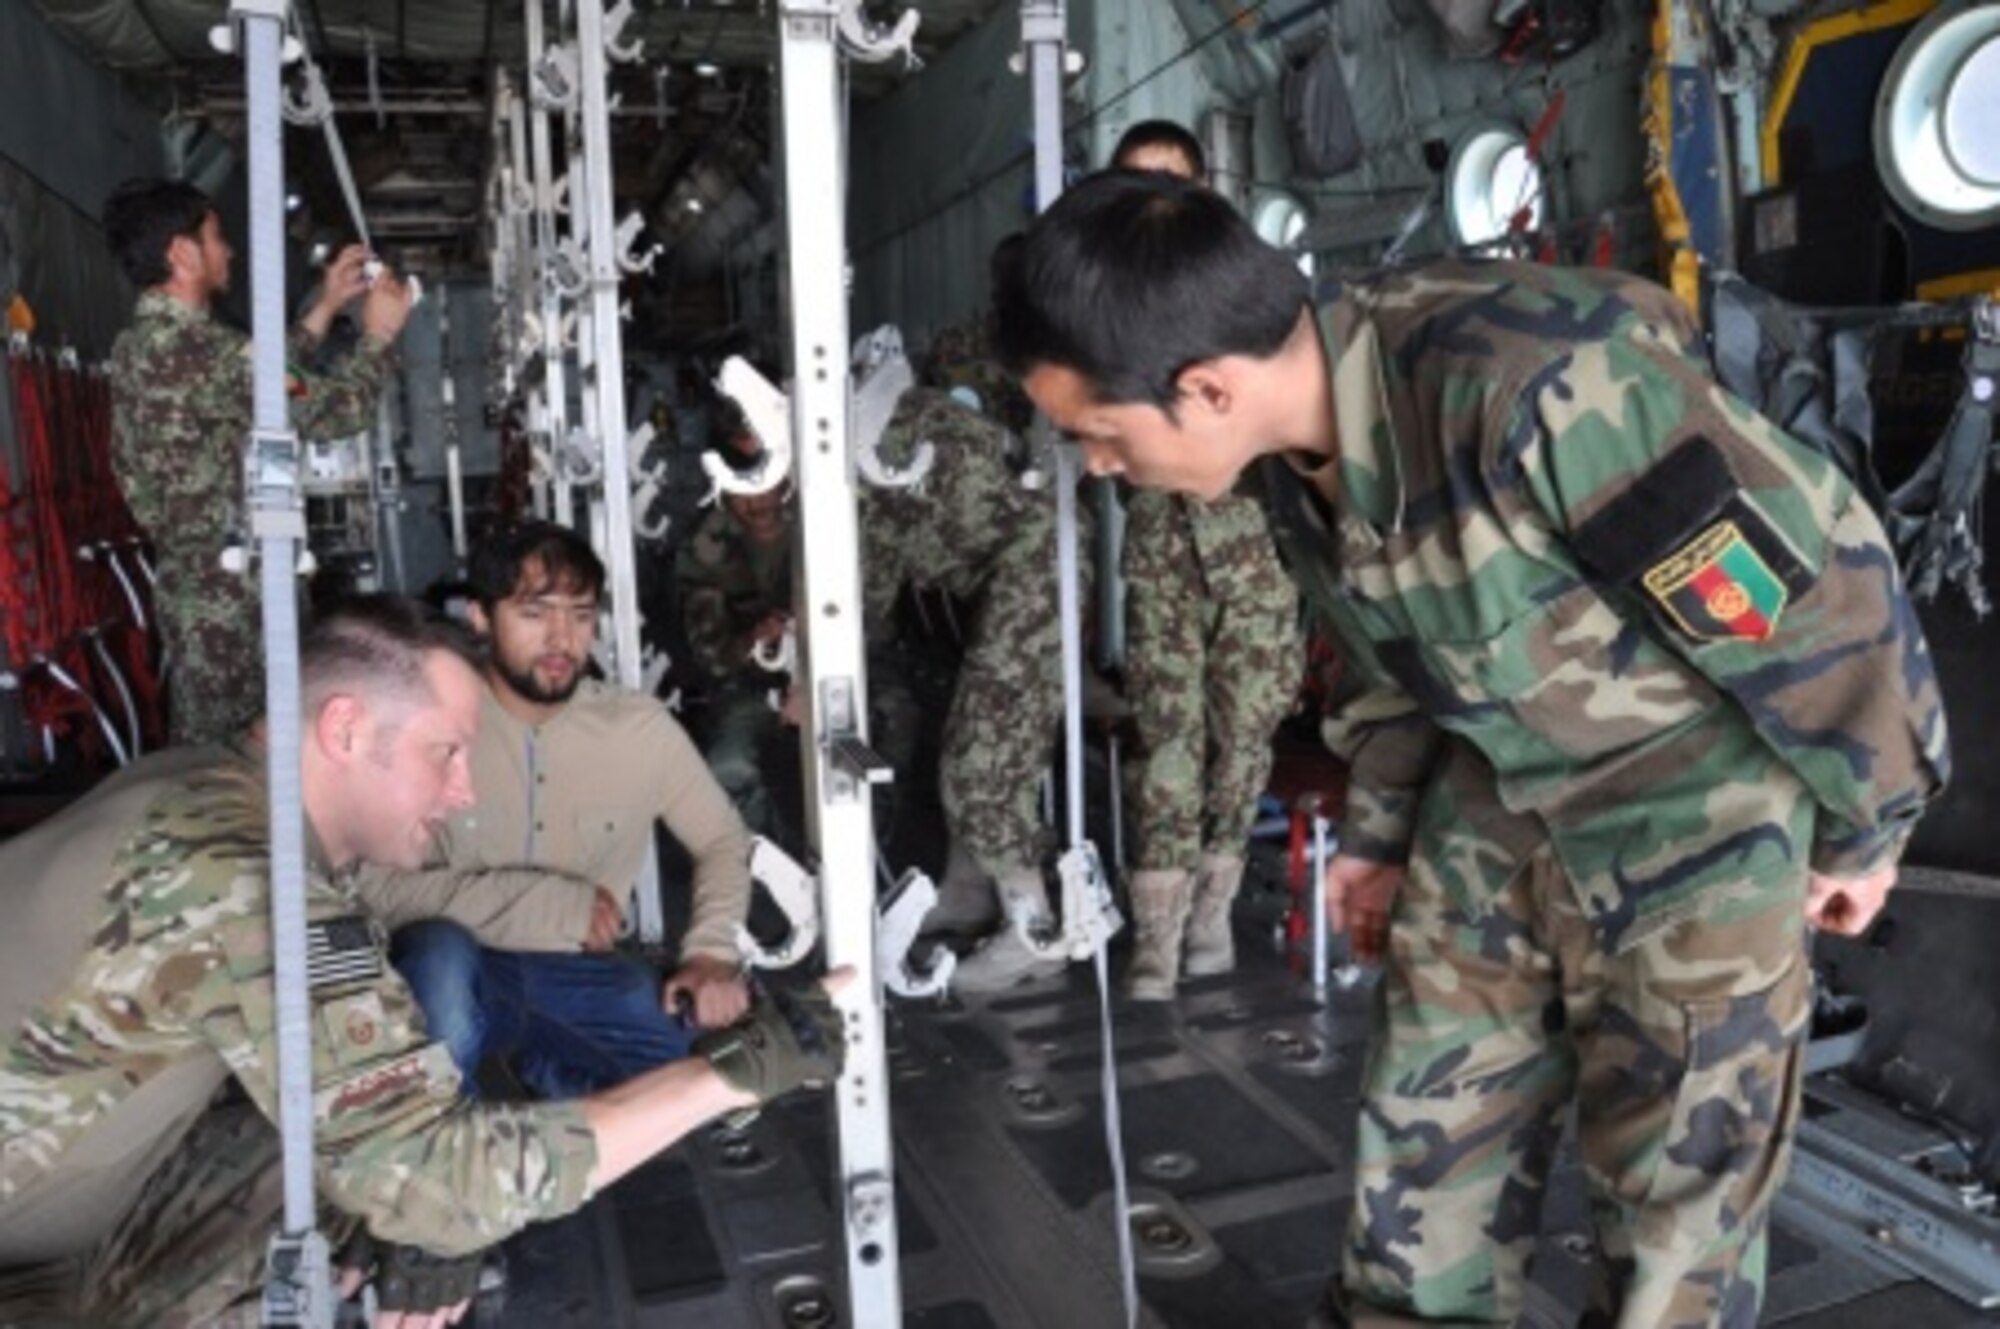 Master Sgt. Matthew Scott (left) points out to an Afghan National Army flight medic the importance of measurement and balance in the metal stanchions in the back of a C-130H Hercules at Hamid Karzai International Airport, Afghanistan, July 9, 2015. Scott is an aeromedical evacuation technician and emergency room manager at Eglin Air Force Base, Fla., who is currently the senior enlisted adviser at the nearby NATO clinic in Kabul. (U.S. Air Force photo/Capt. Eydie Sakura)